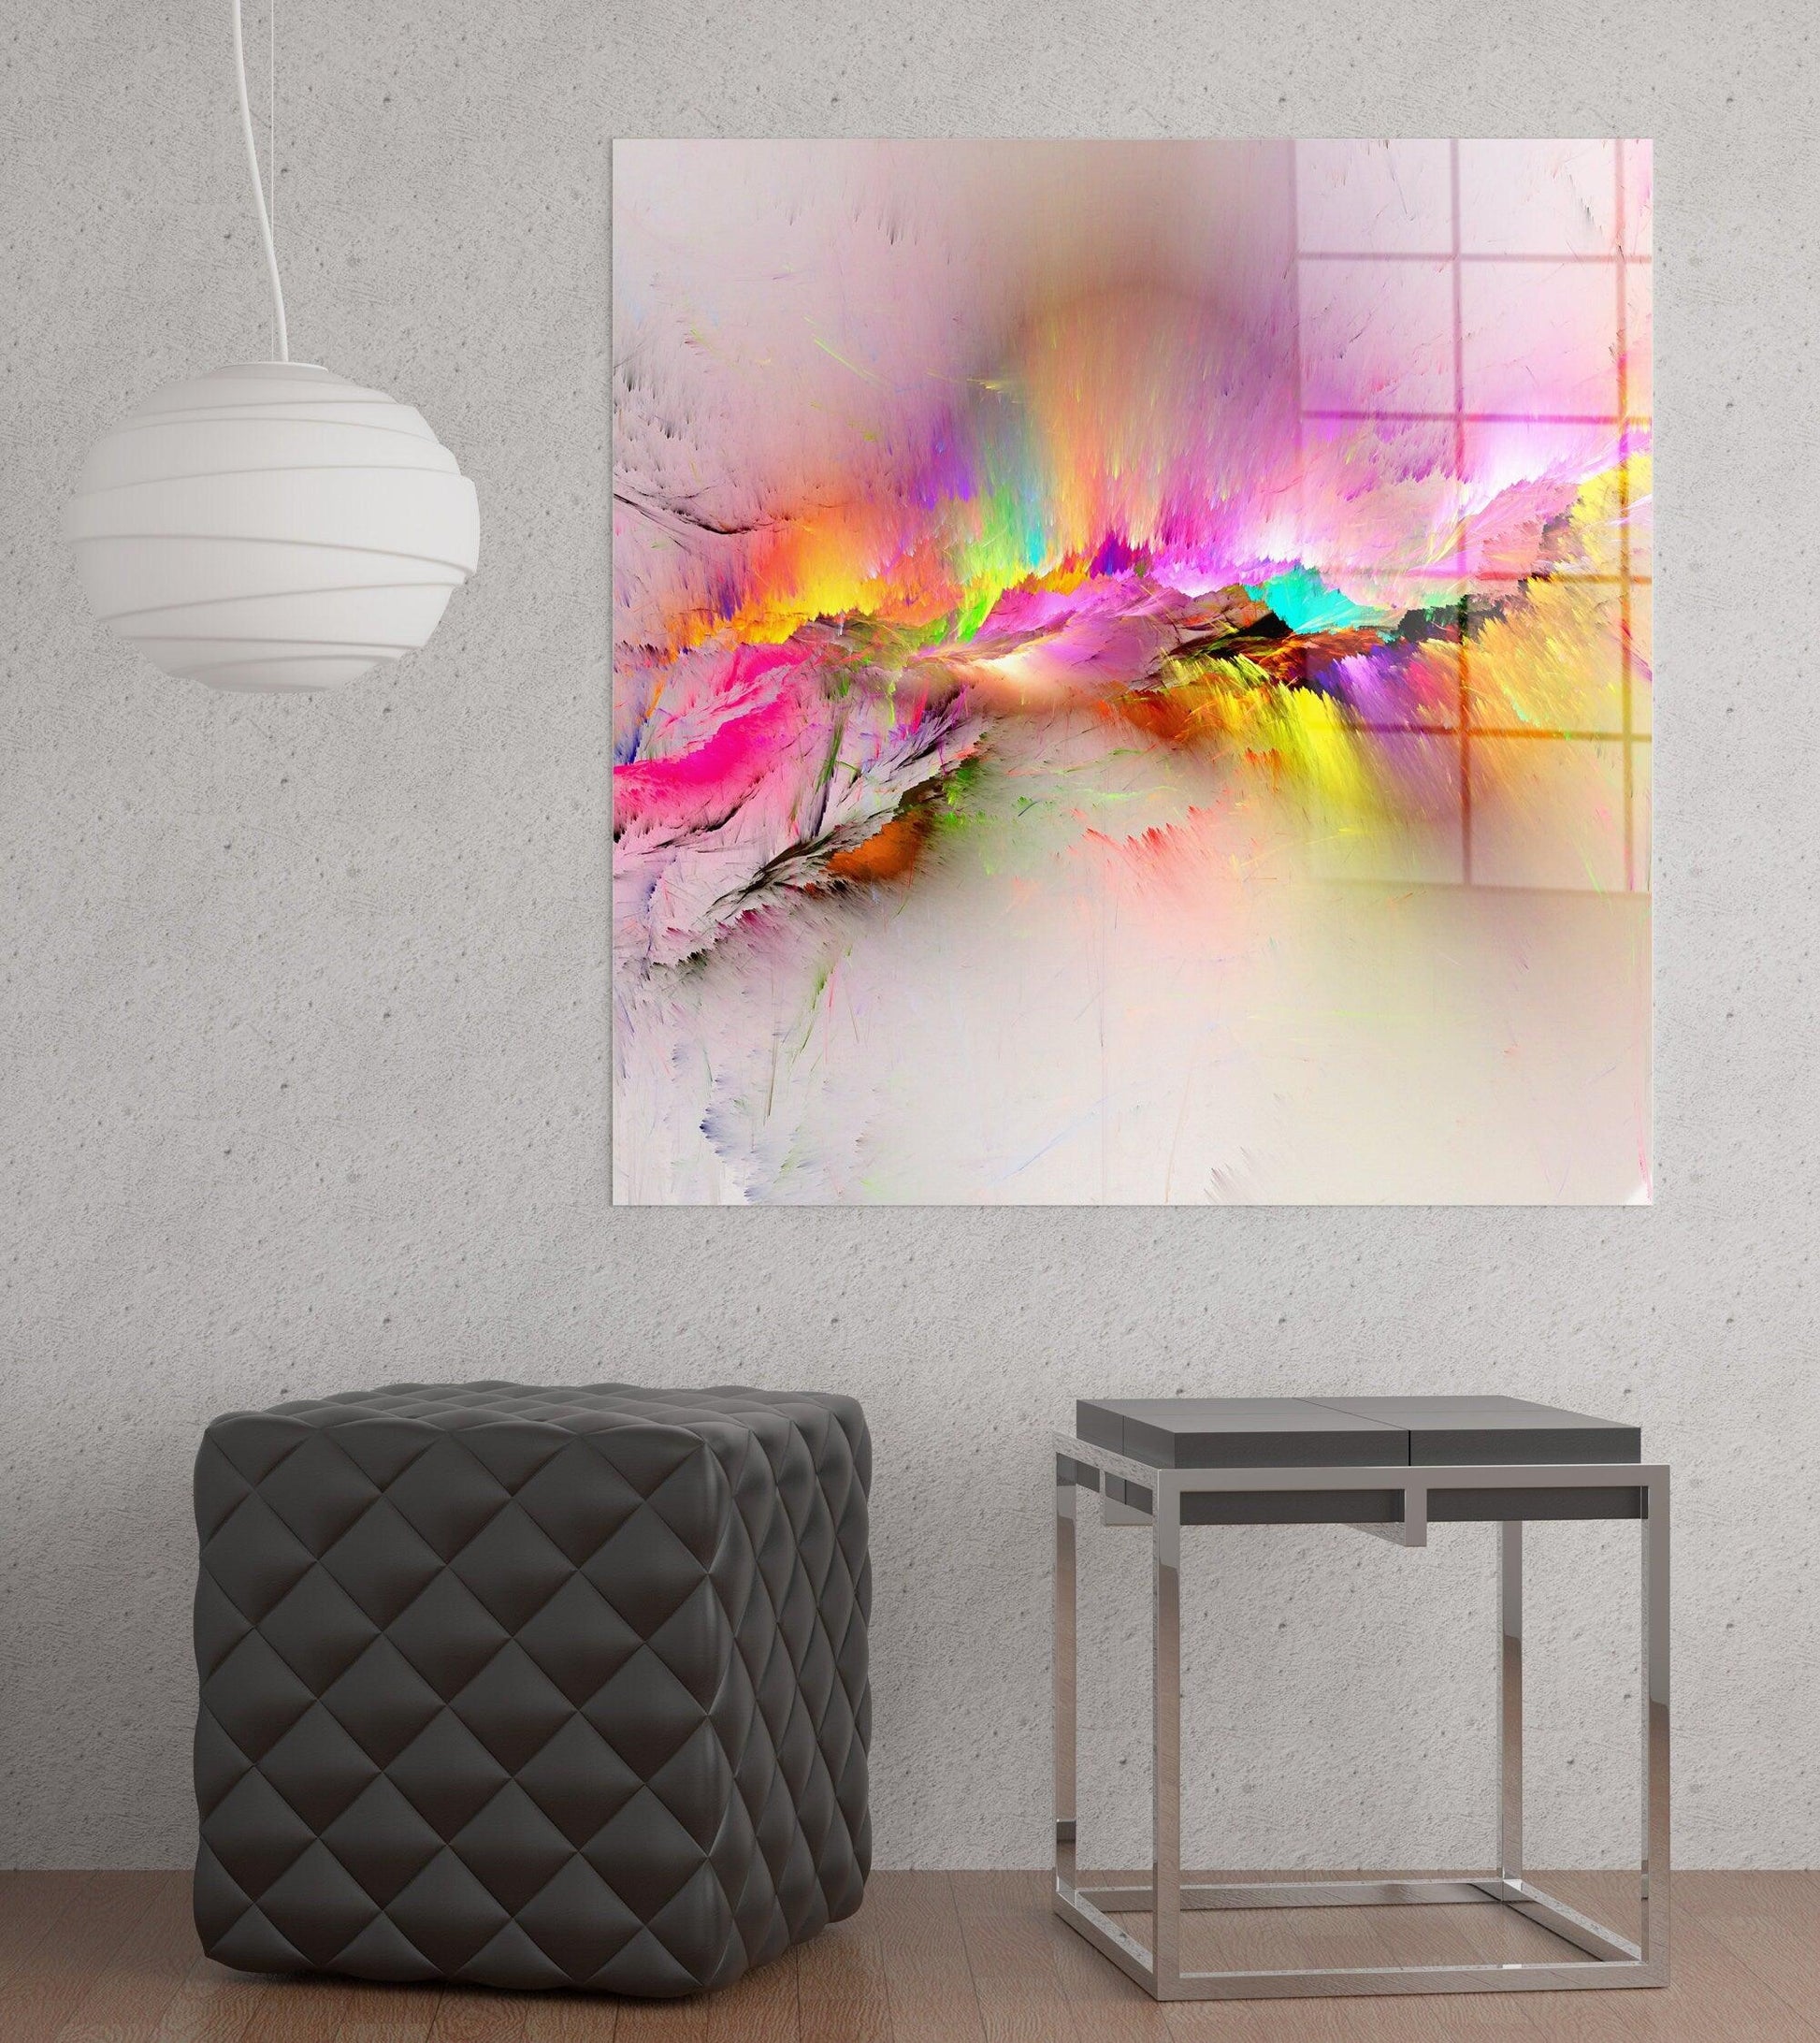 AB970 Modern pink yellow large Canvas Wall Art Abstract Picture